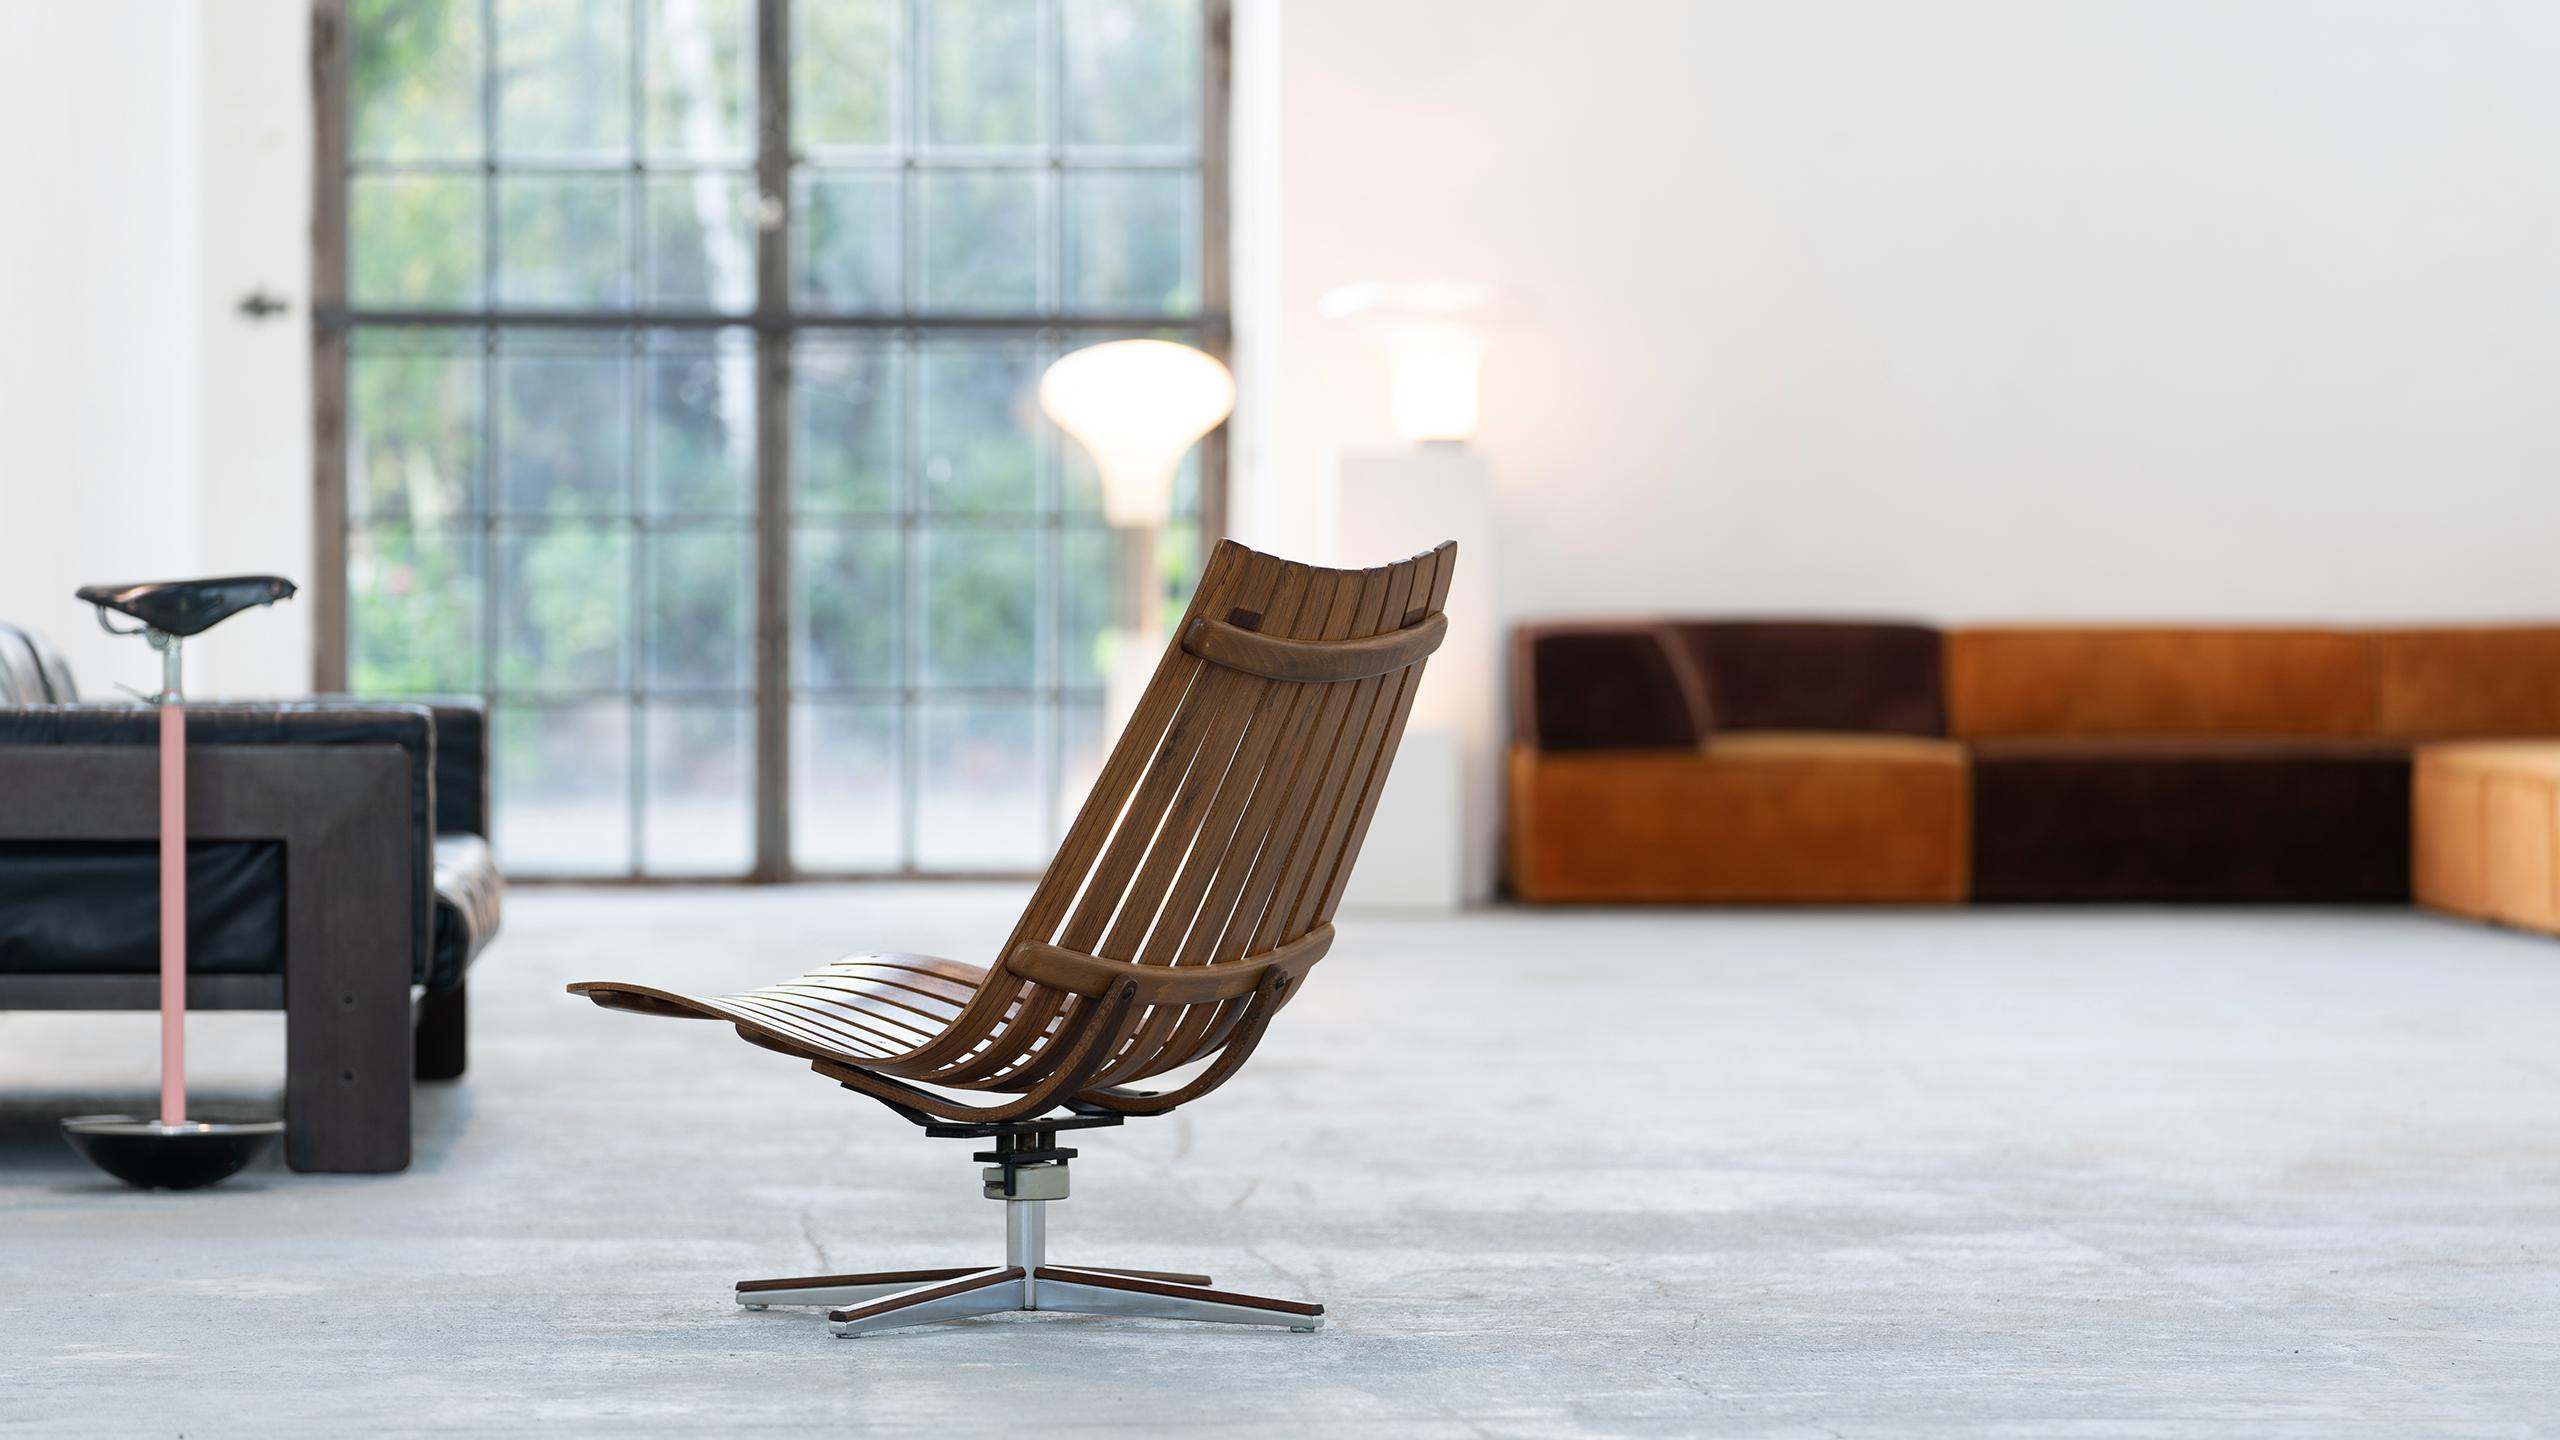 Hans Brattrud, Scandia Swivel Lounge Chair, 1957 for Hove Møbler, Norway For Sale 5